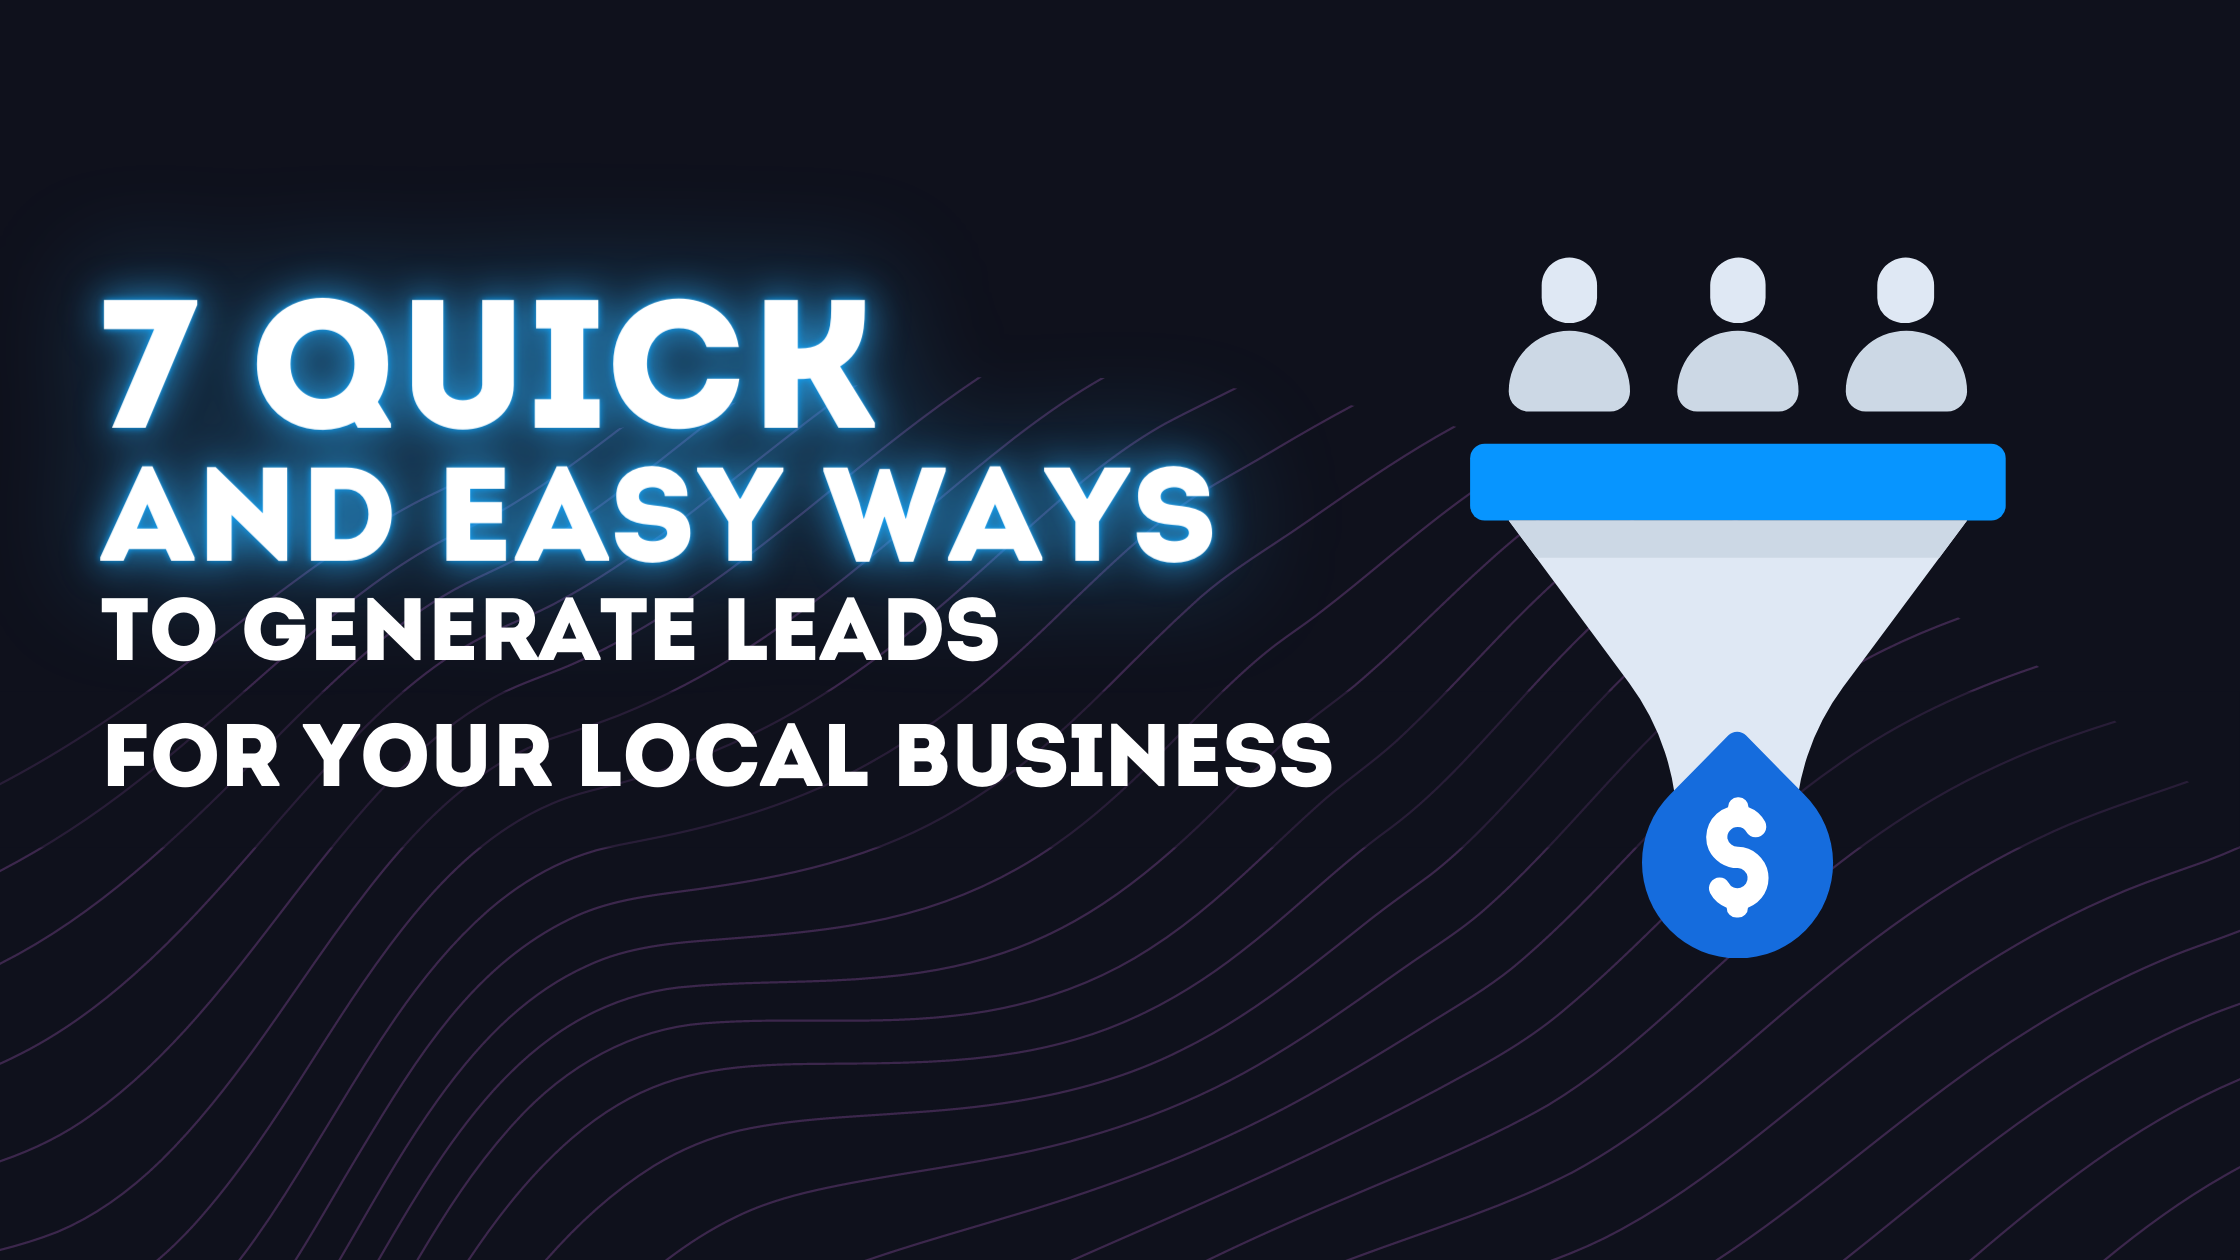 7 Quick and Easy Ways To Generate Leads For Your Local Business